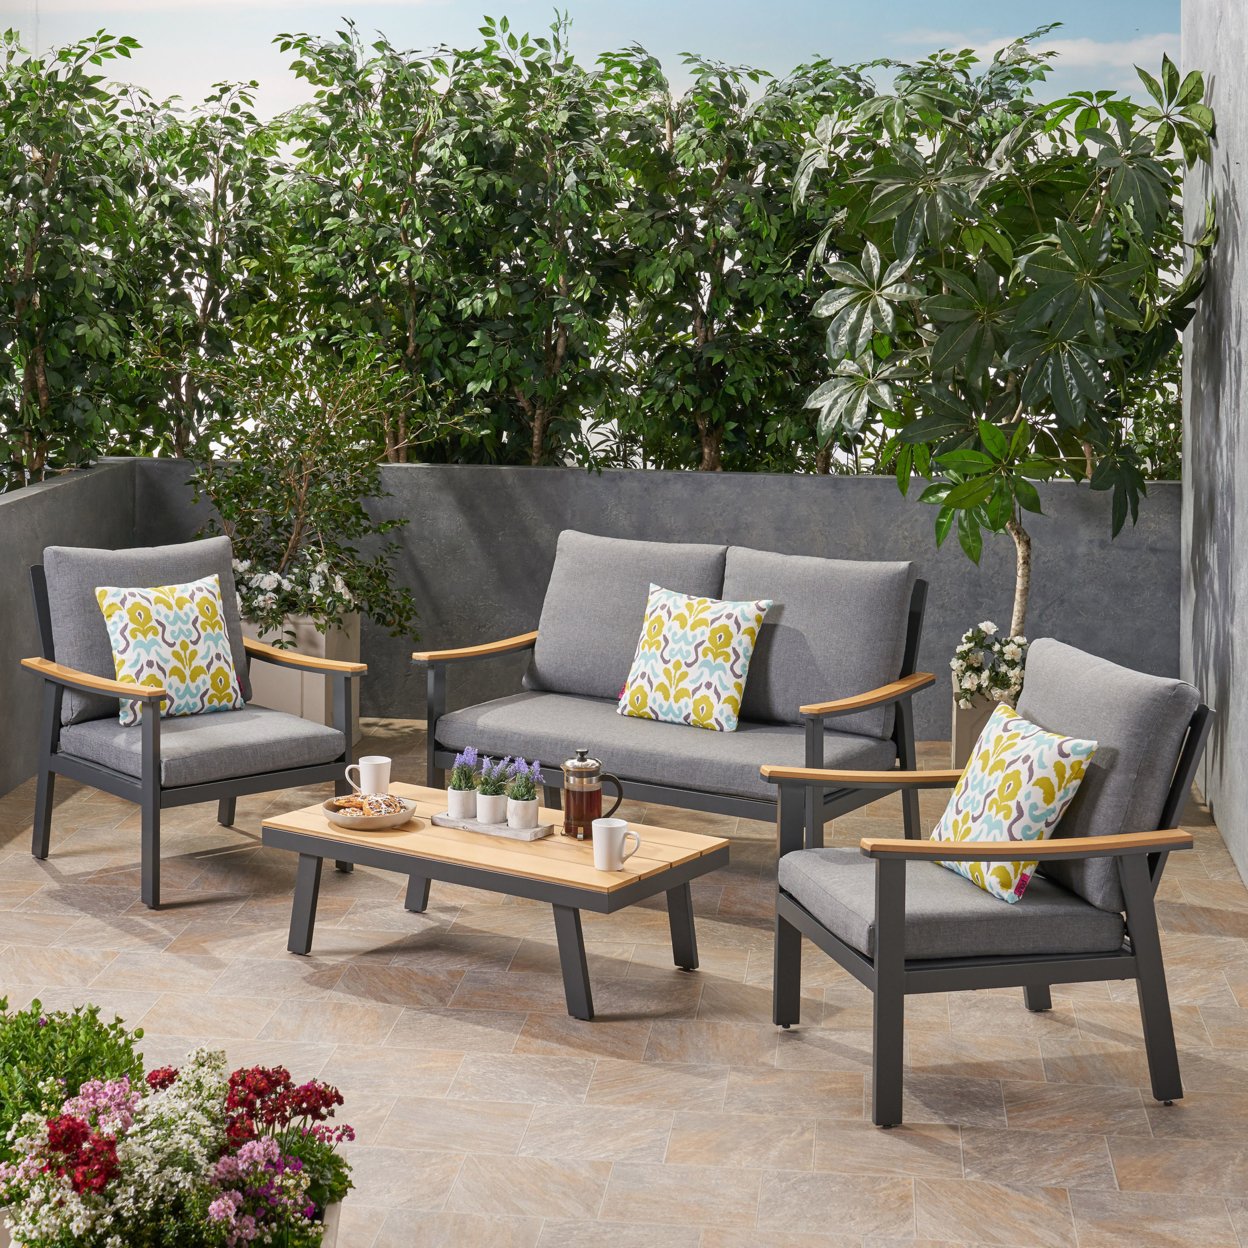 Agnes Outdoor 4 Piece Aluminum And Faux Wood Chat Set With Cushions - Gray, Dark Gray